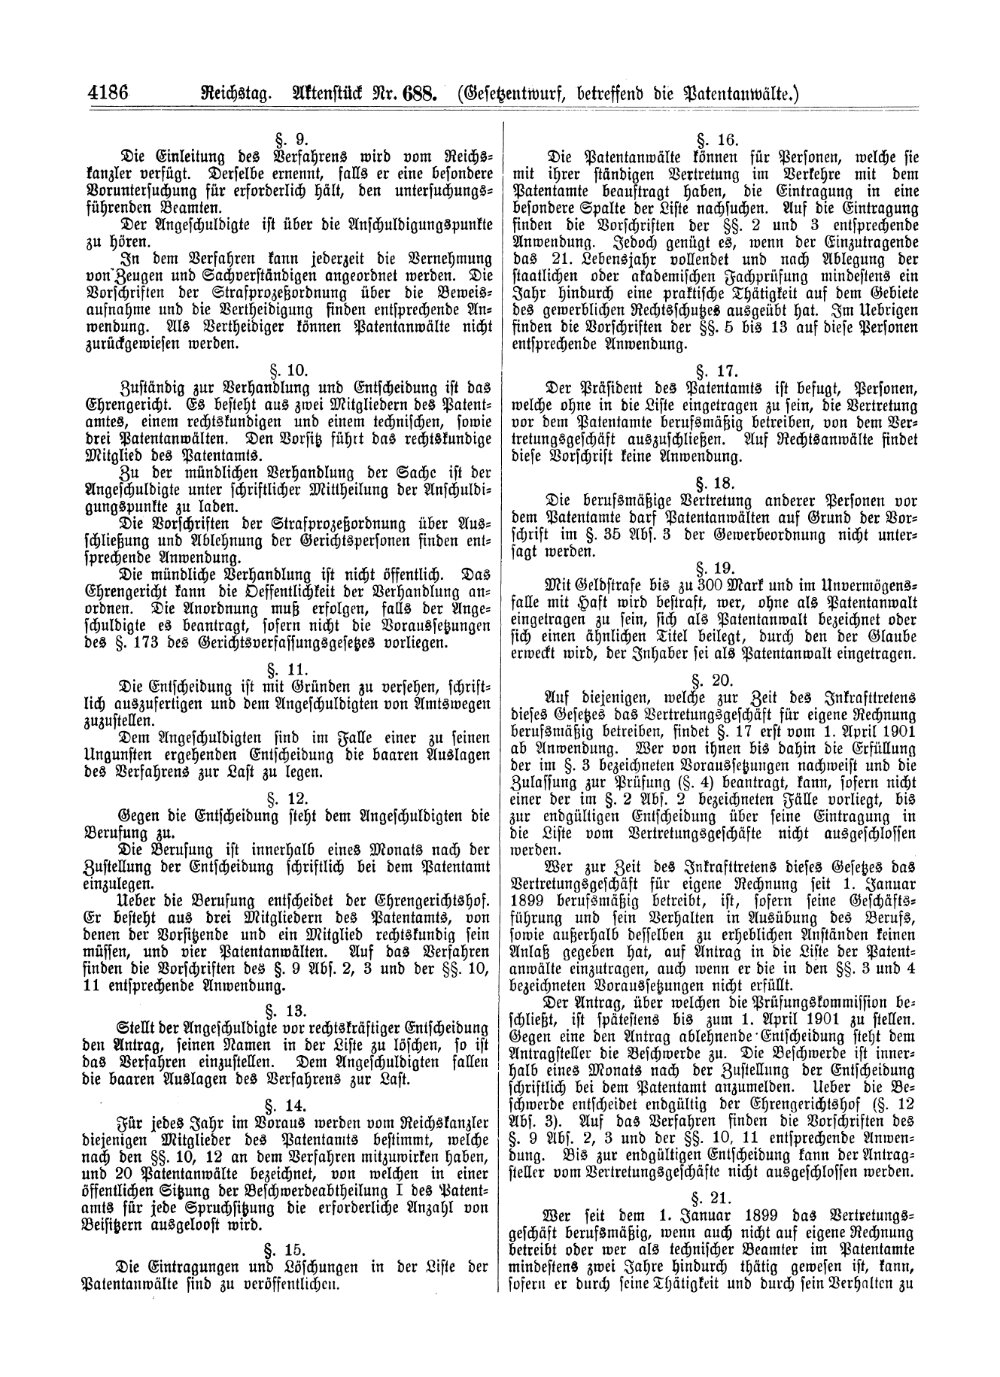 Scan of page 4186